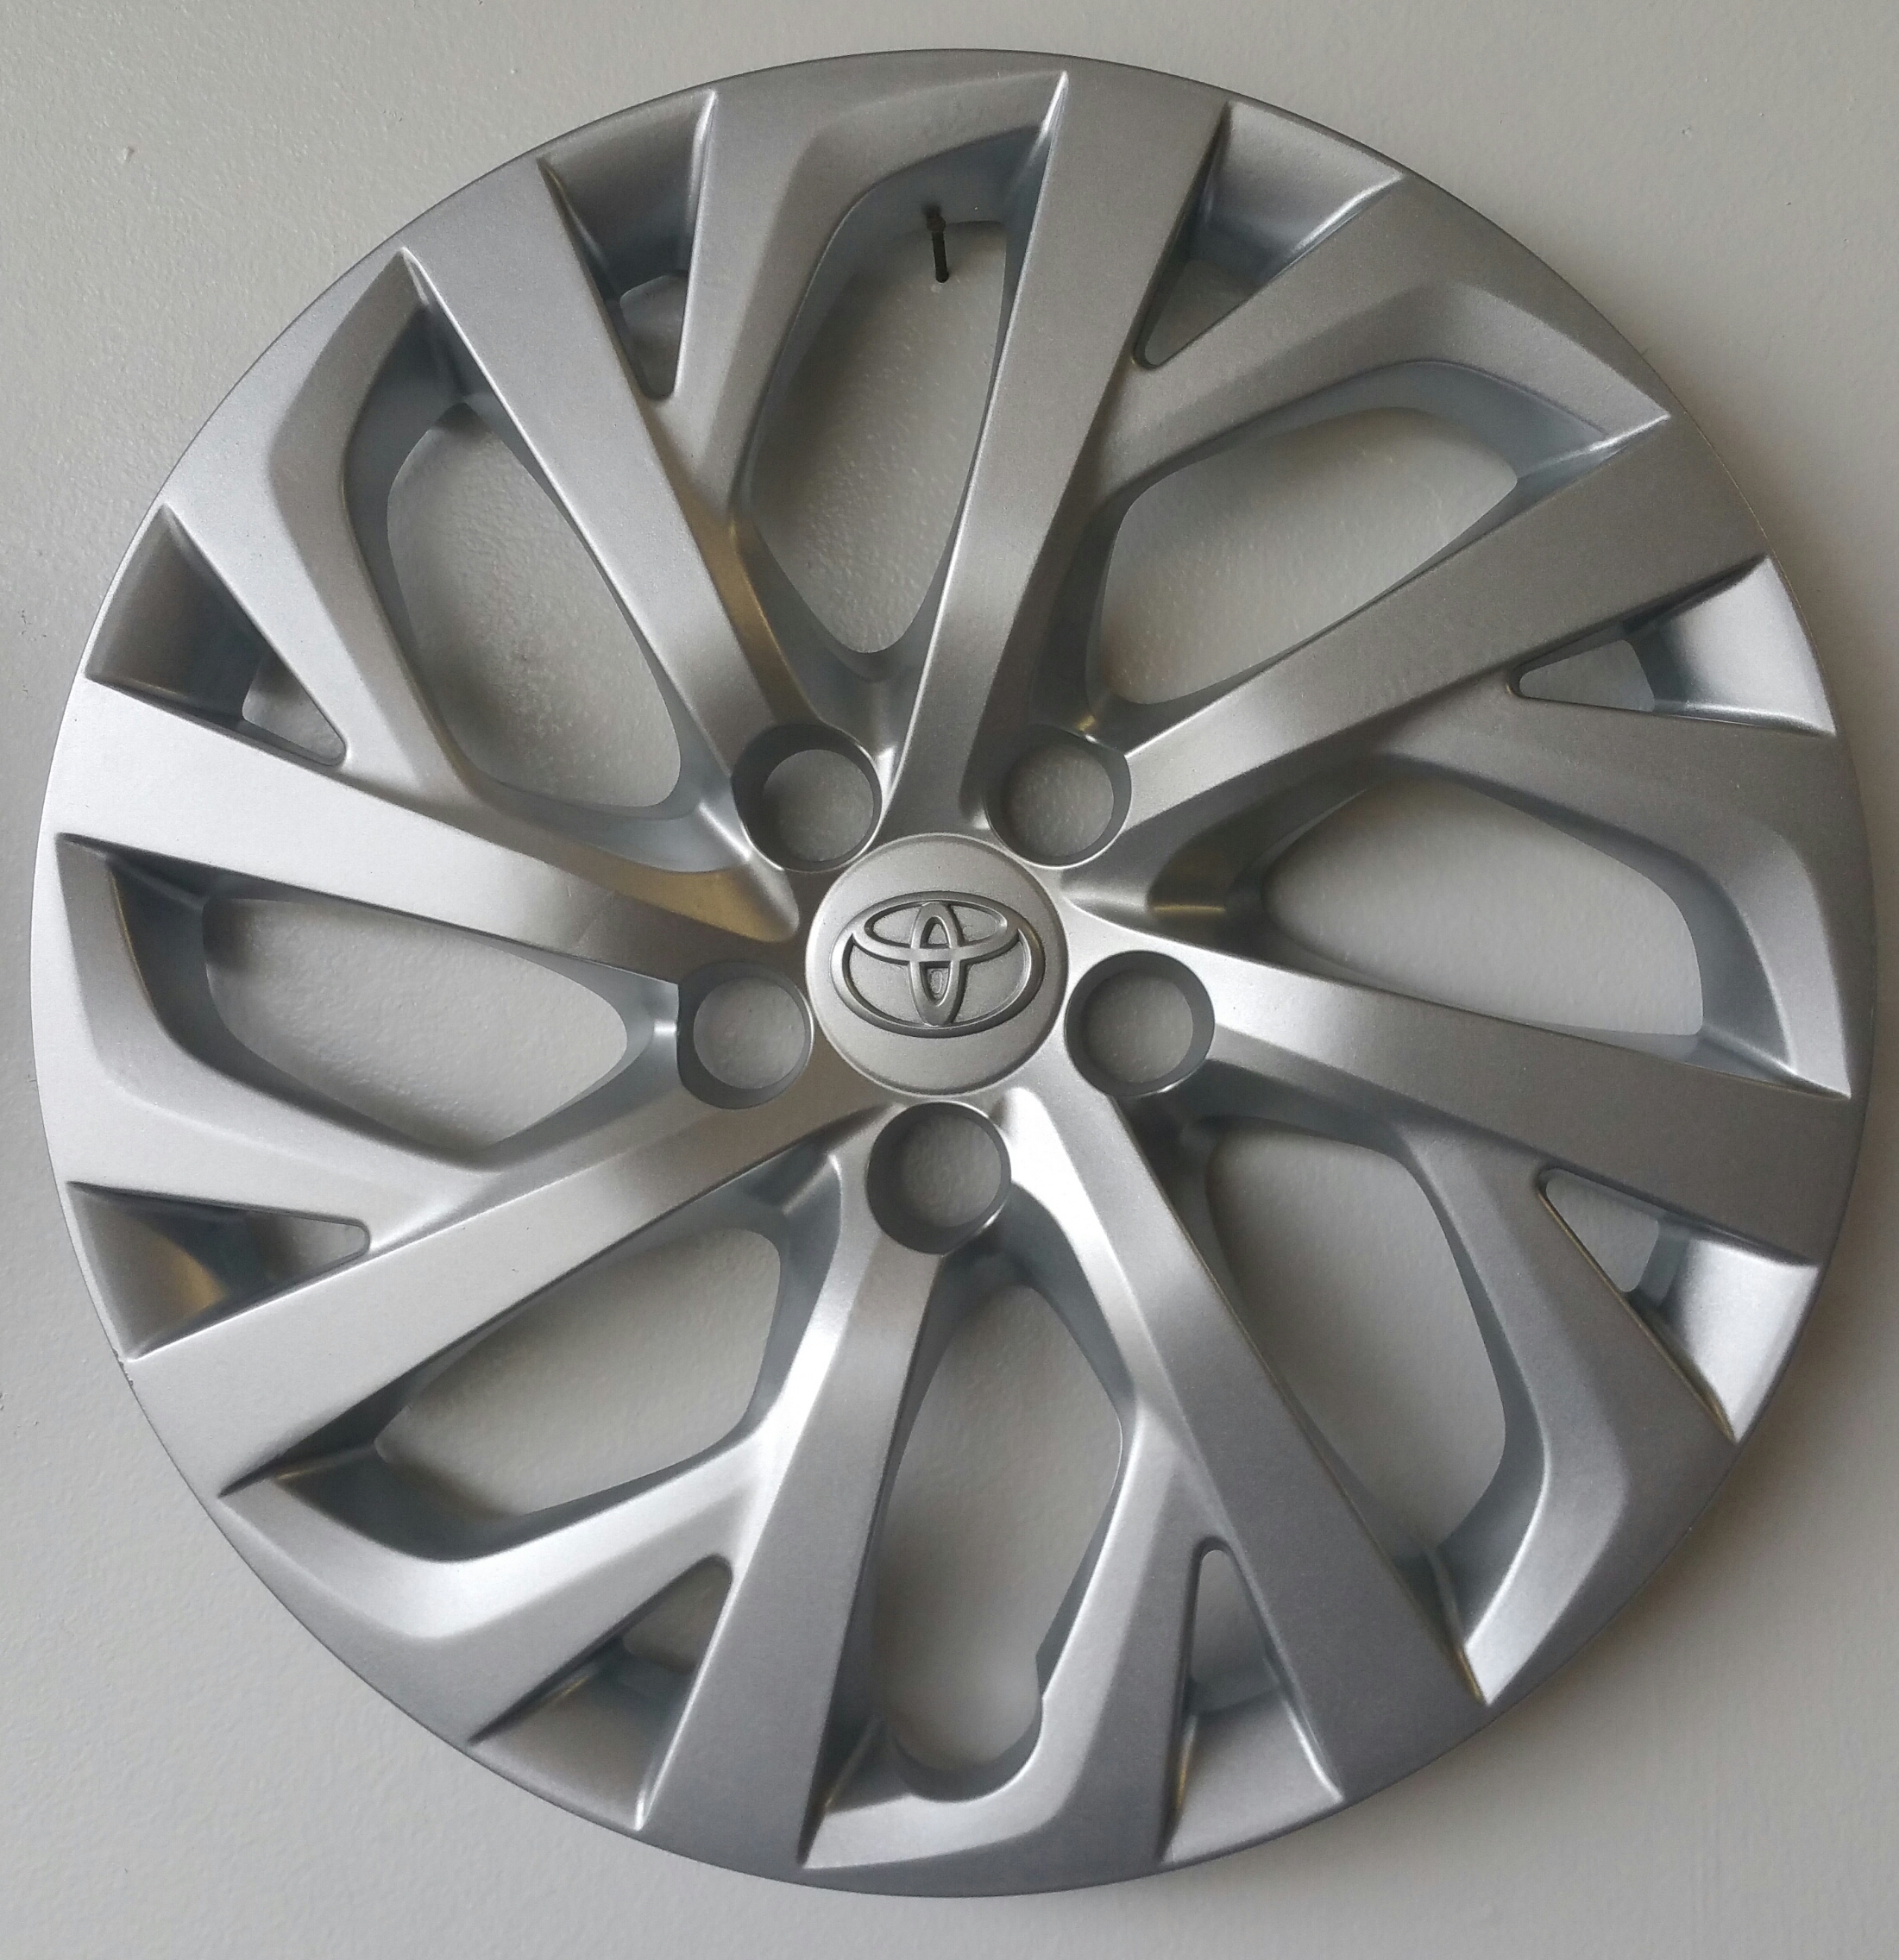 toyota hubcaps 16 inch